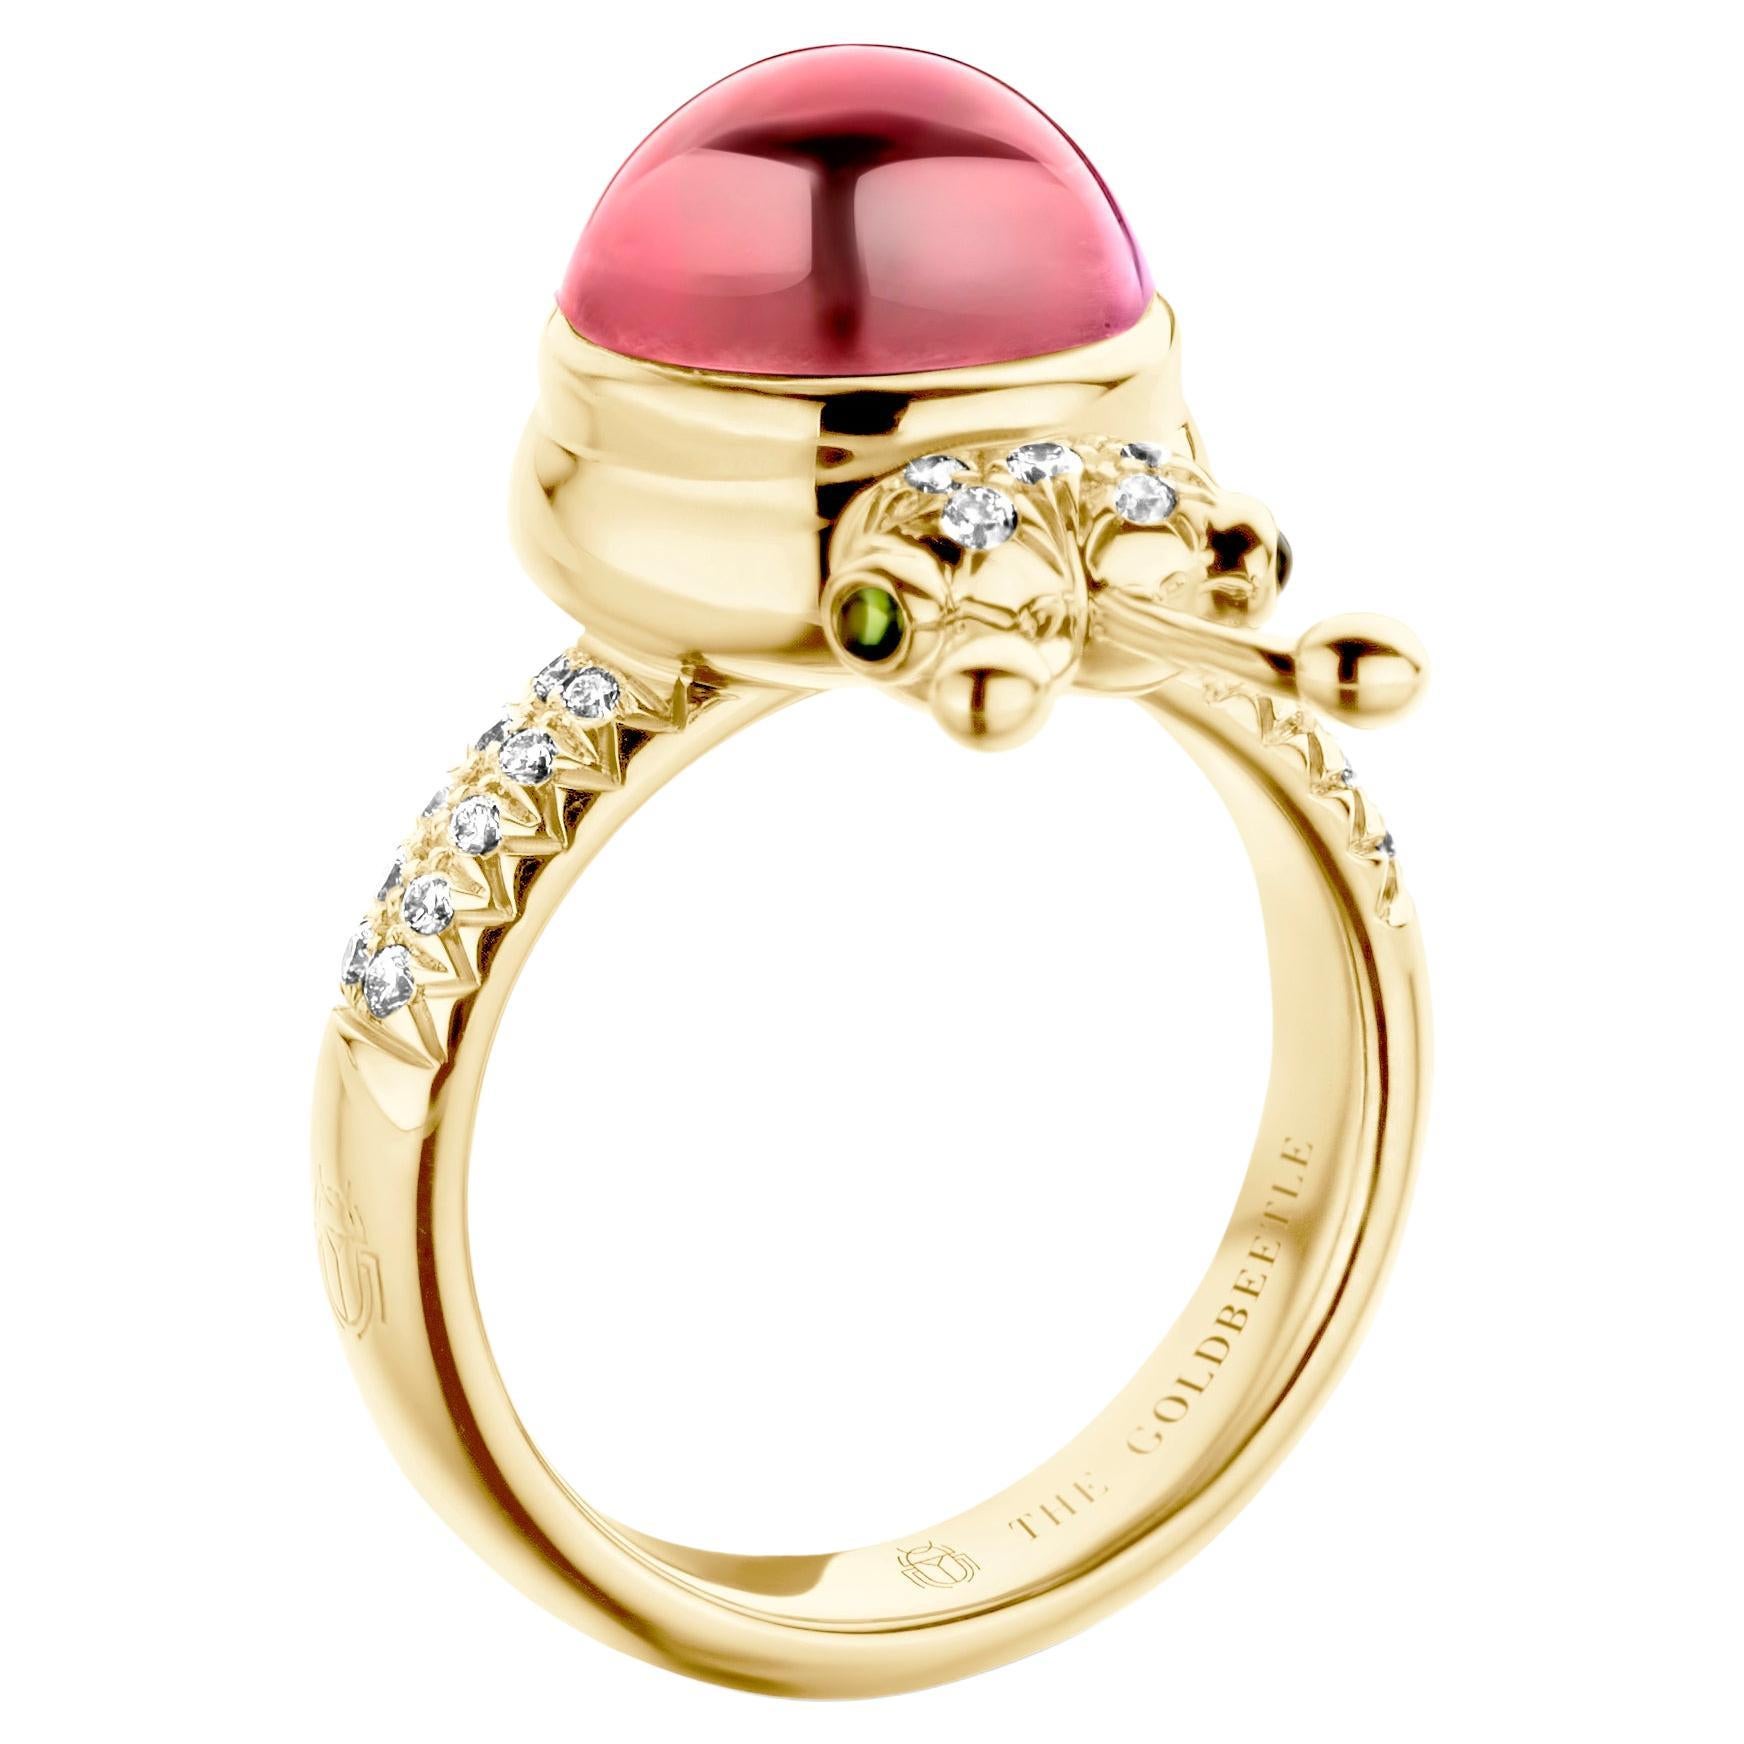 One-of-a-kind lucky beetle ring in 18-Karat yellow gold 10g set with the finest natural diamonds in brilliant cut 0,23 Carat (VVS/DEF quality) one natural, pink tourmaline in round cabochon cut 6,00 Carat and two tsavorites in round cabochon cut.